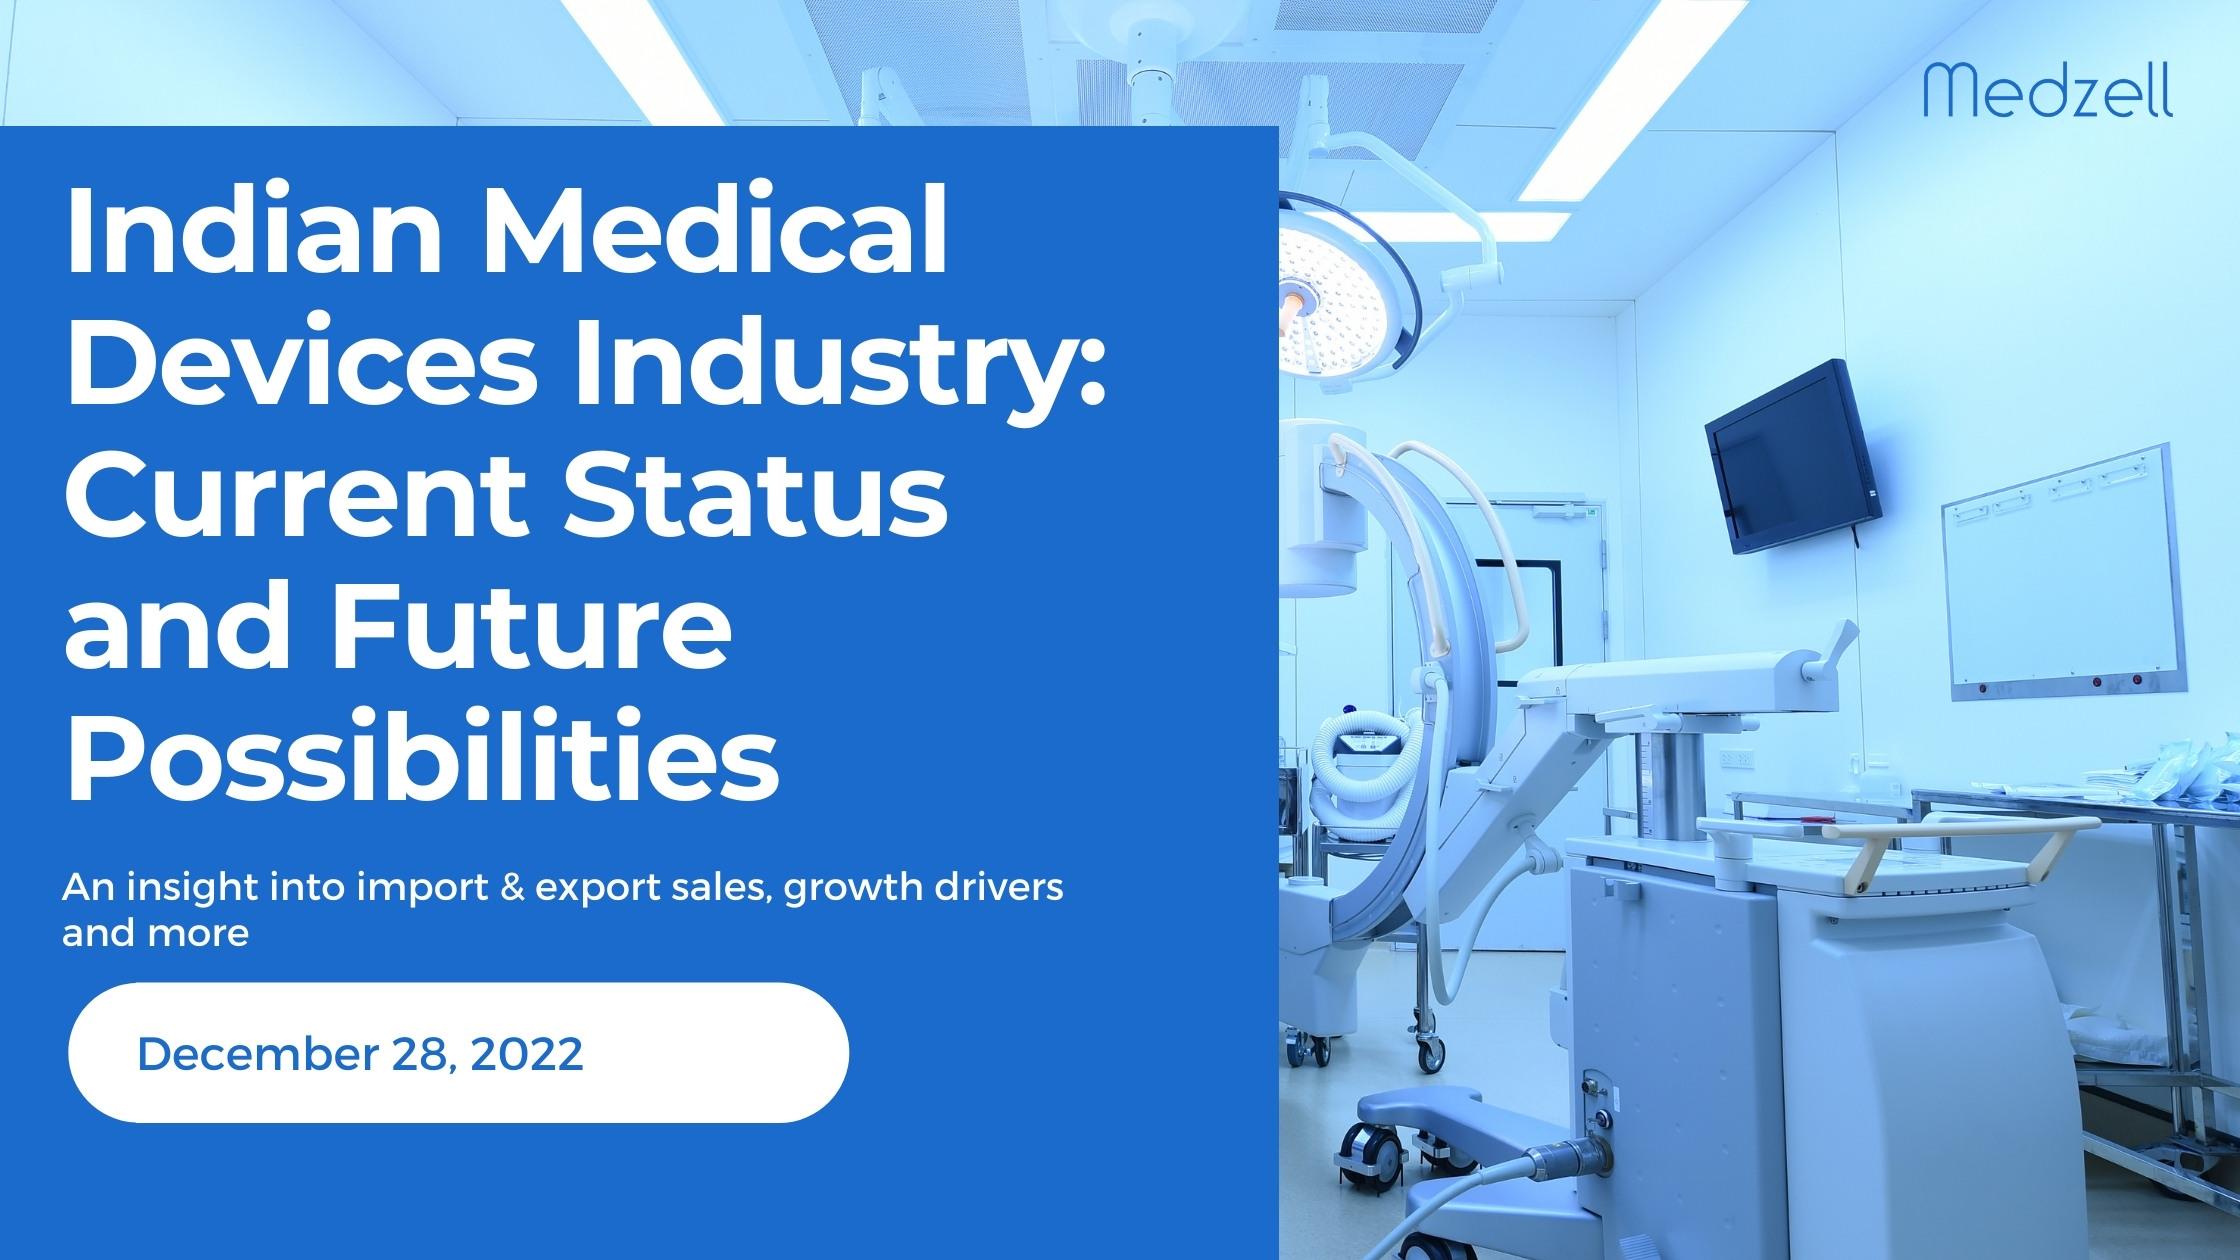 Indian Medical Devices Industry: Current Status and Future Possibilities